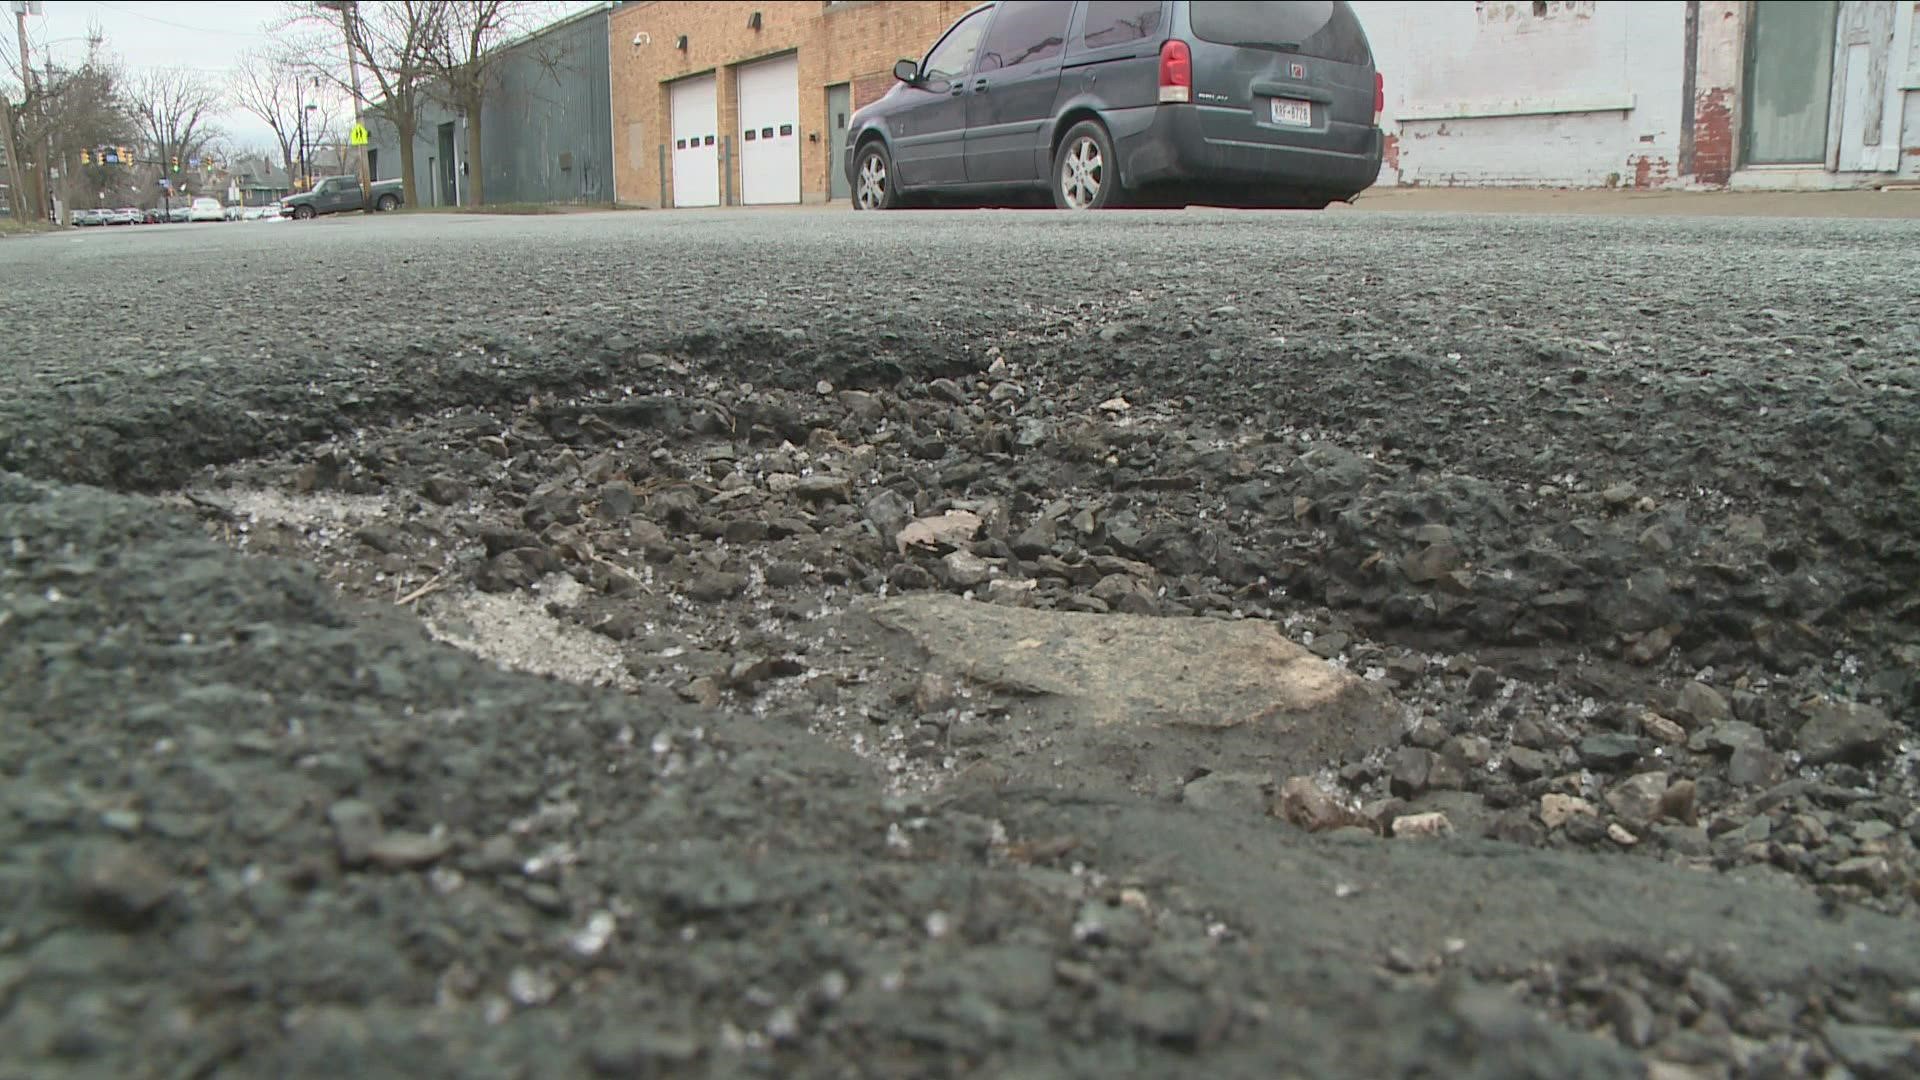 State Sen. Tim Kennedy is also working to get more money approved for road repairs across the state & in WNY.